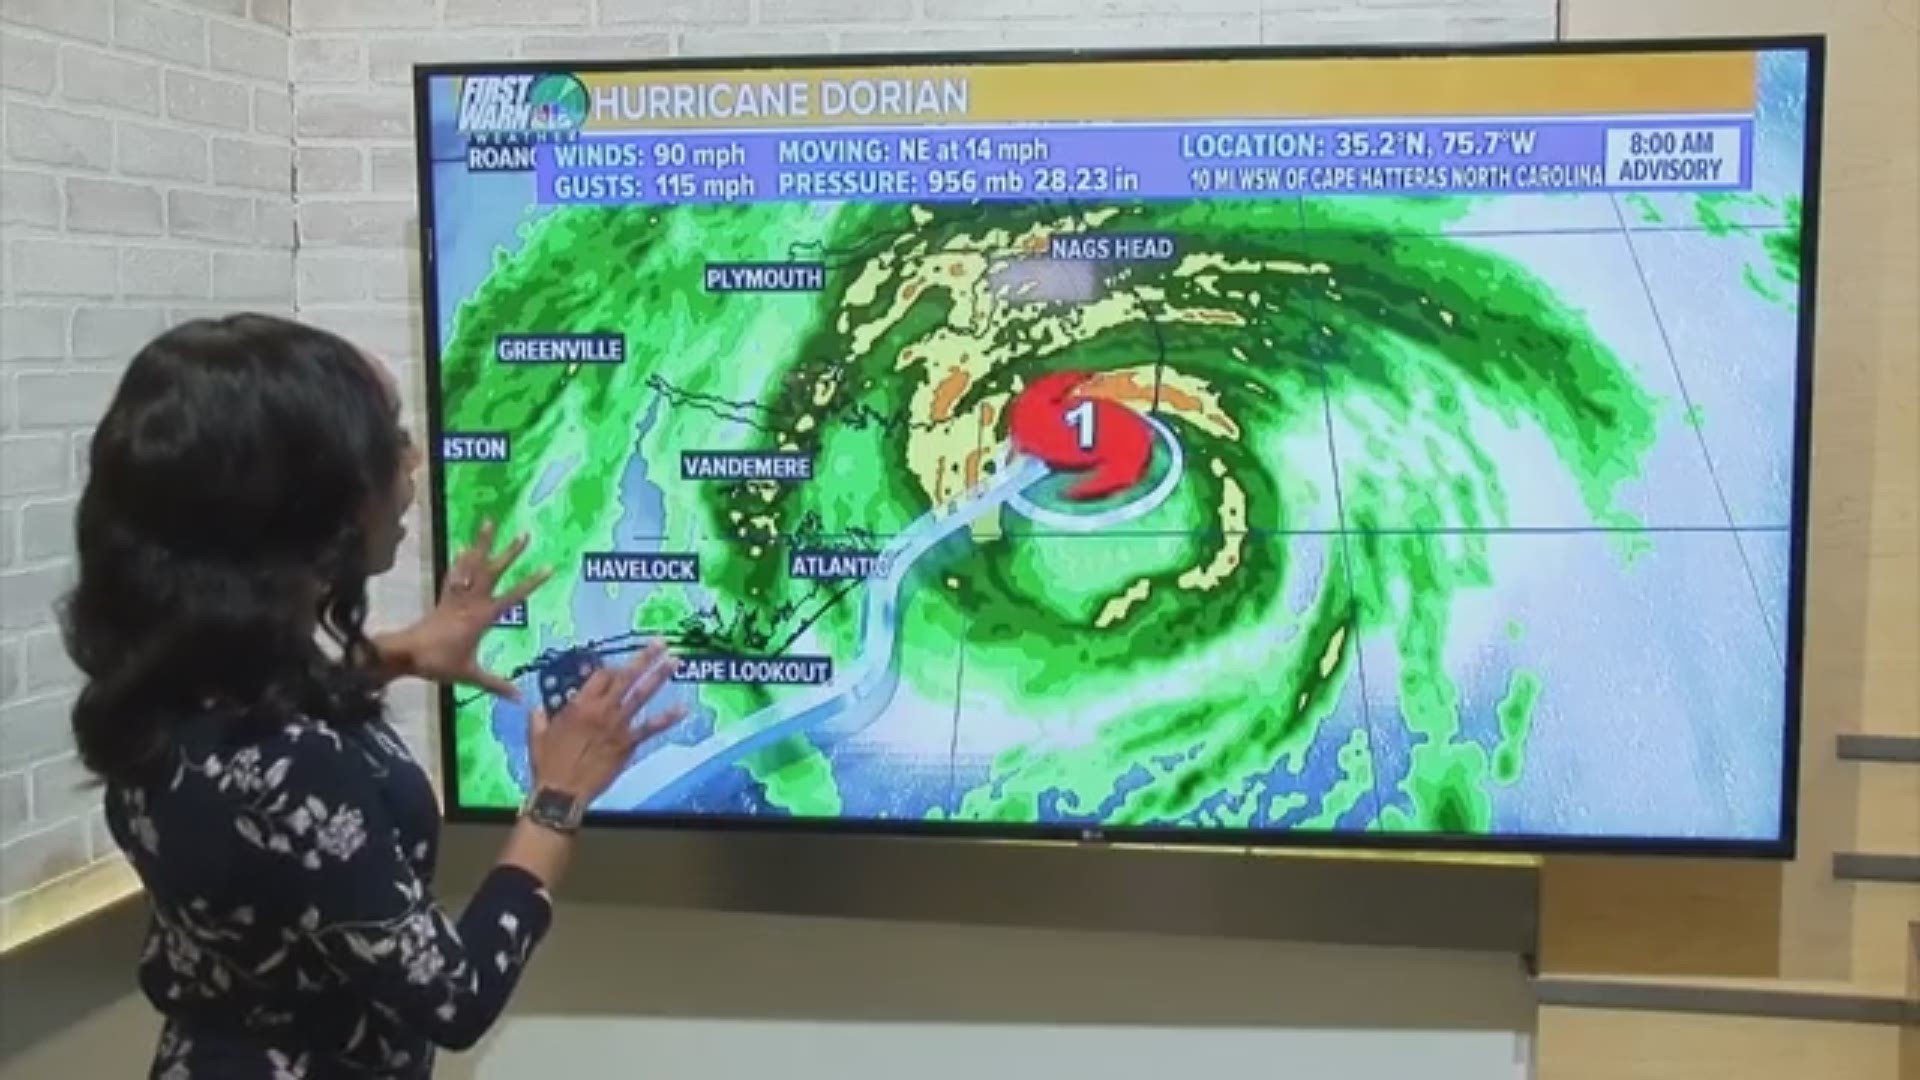 Dorian's eyewall tracked just east of Cape Lookout and landfall is still possible in the Outer Banks near Hatteras, Larry Sprinkle said.